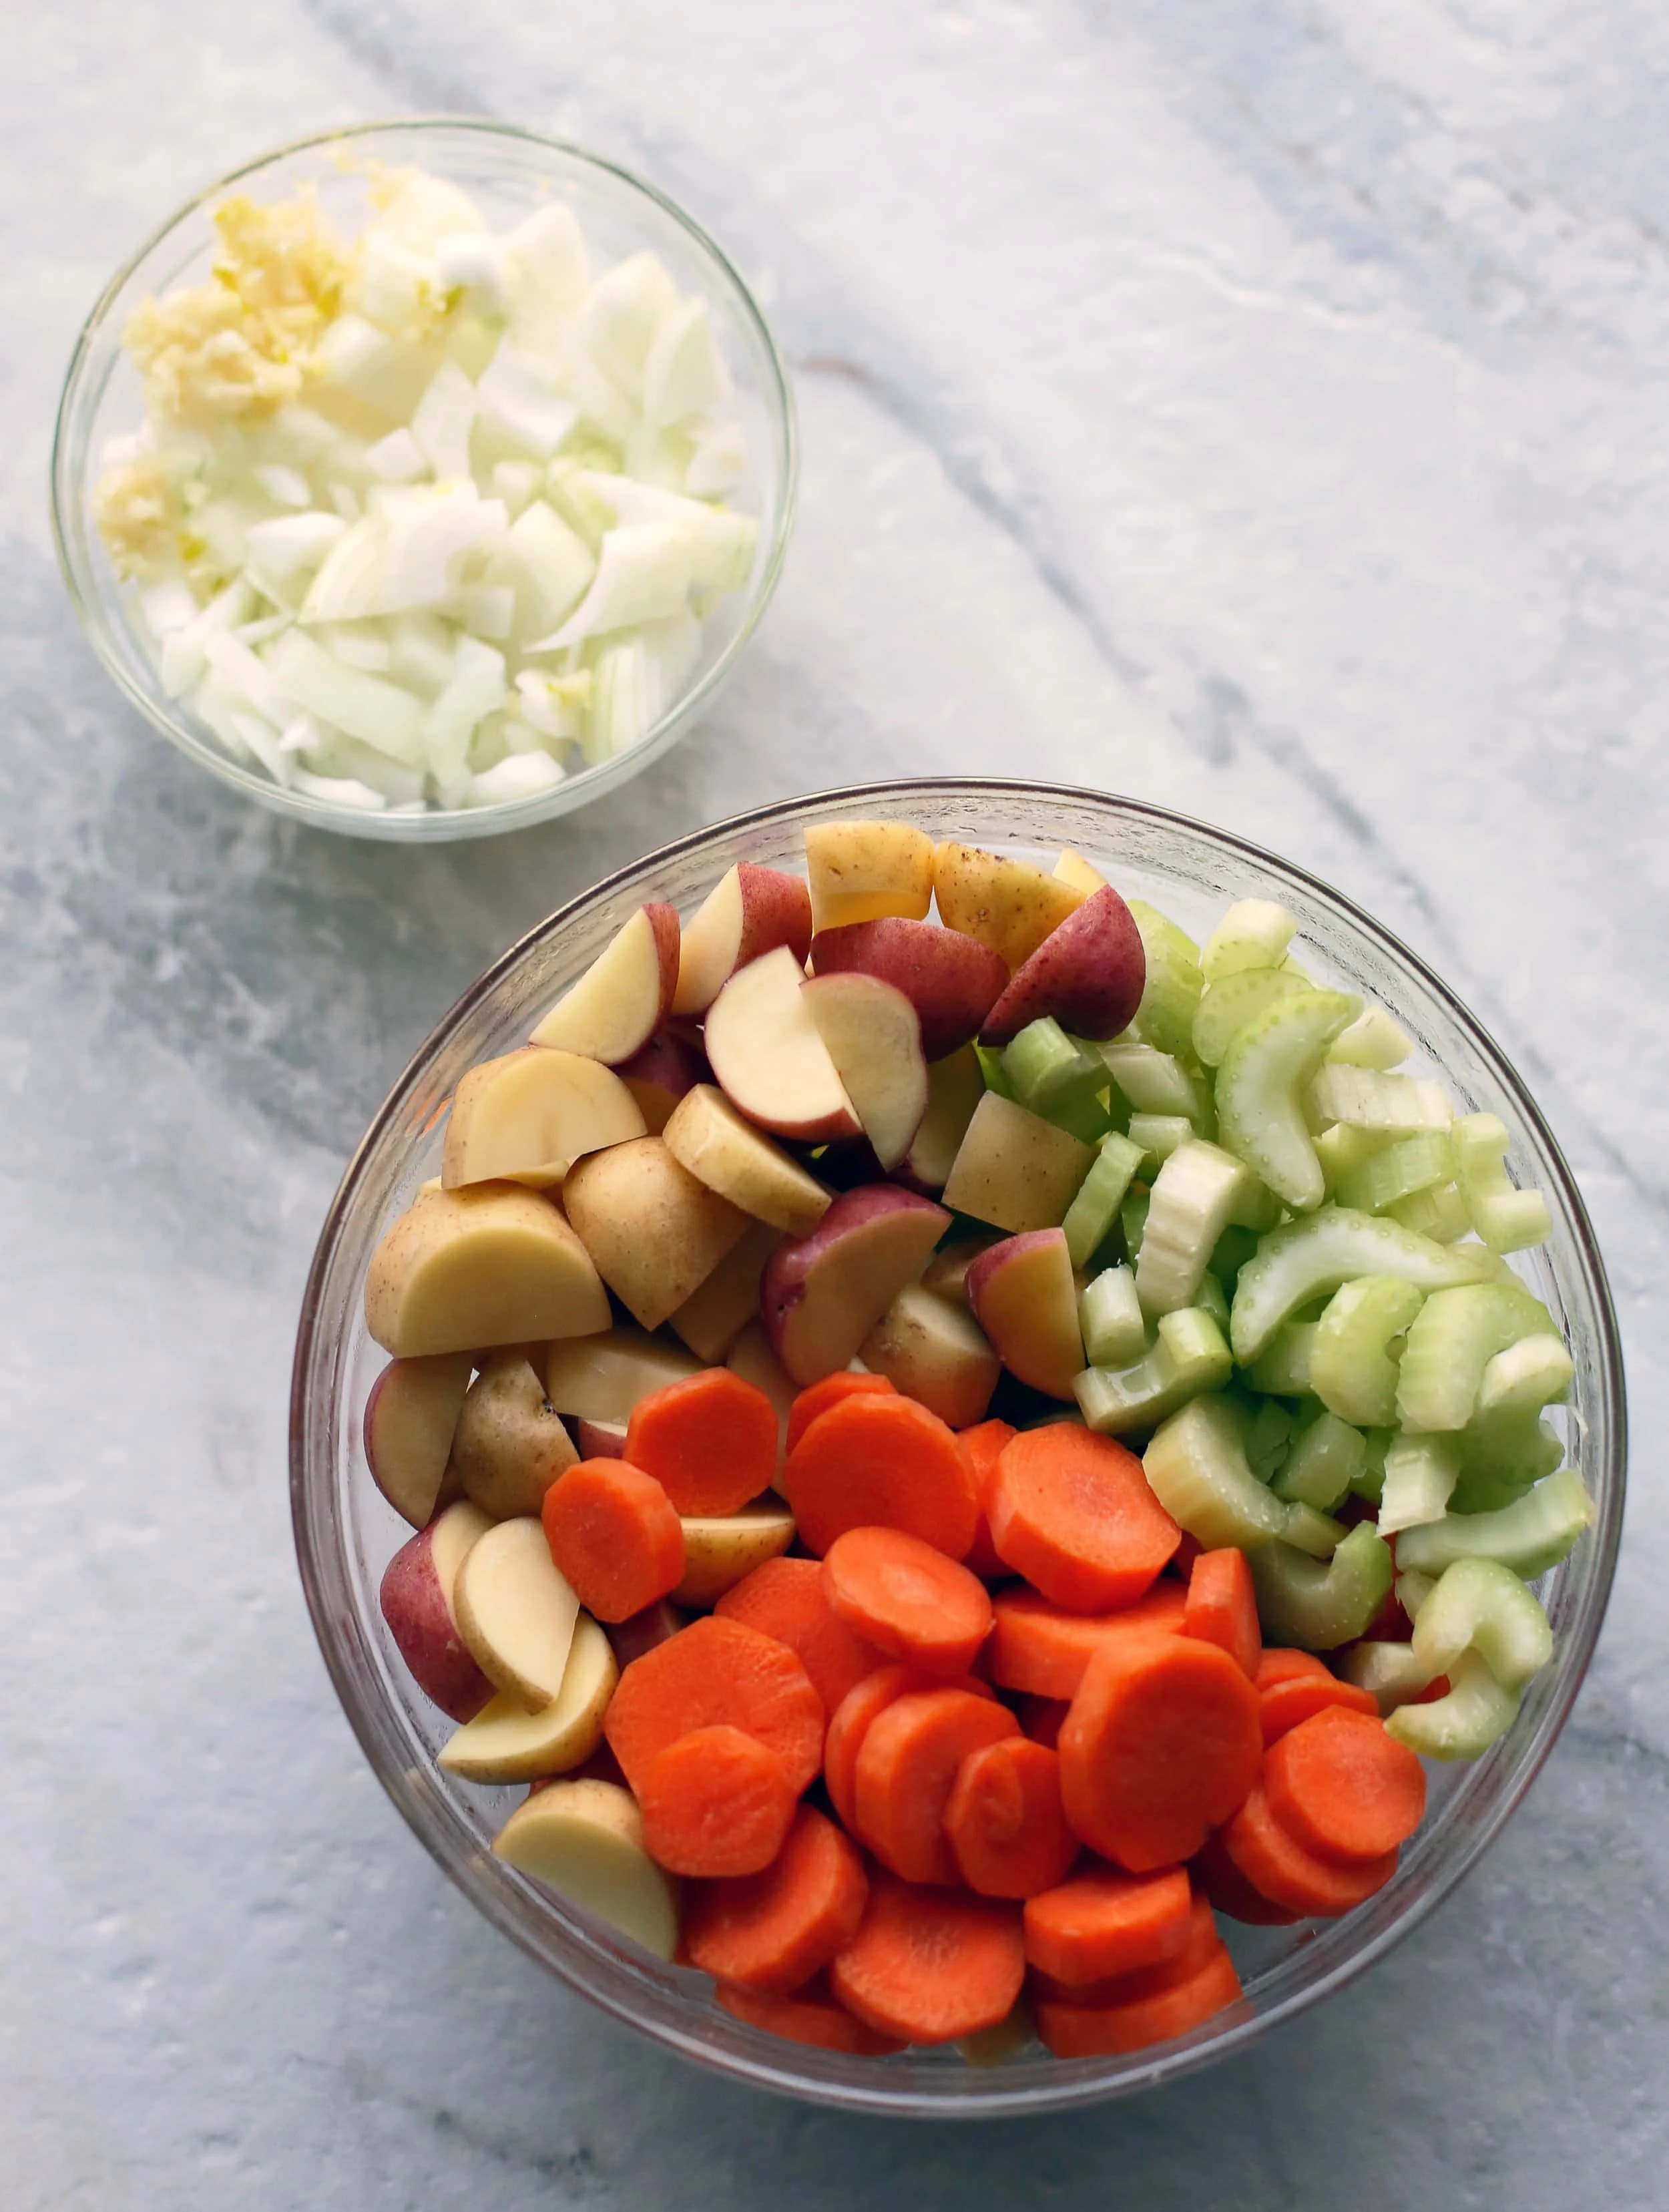 Two glass bowls filled with garlic, onions, carrots, potatoes, and celery.